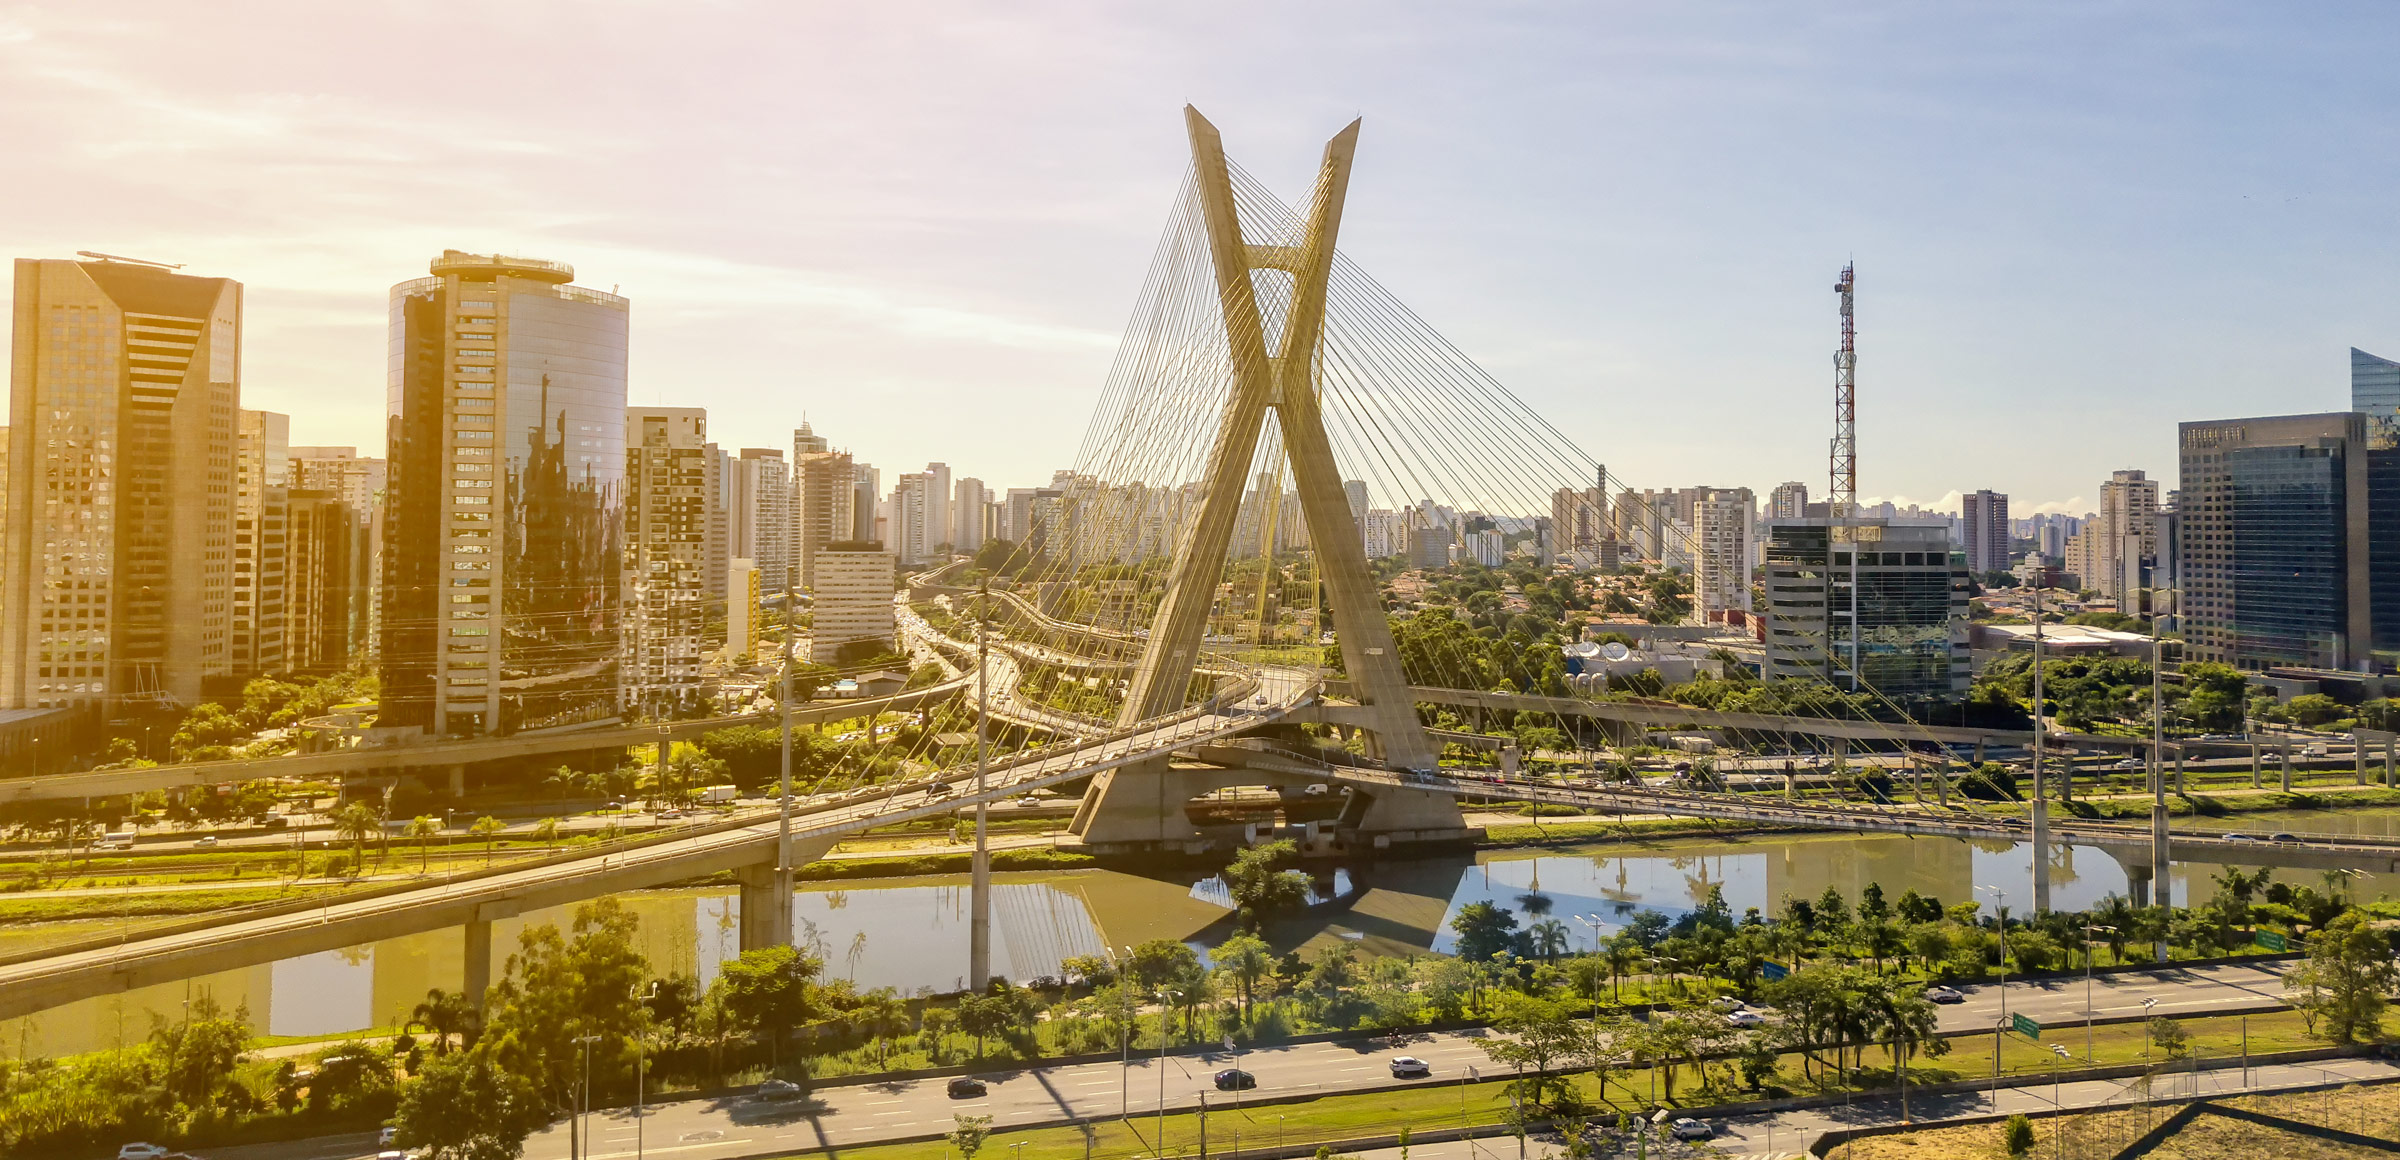 Renewables and smart grids, Enel in Brazil